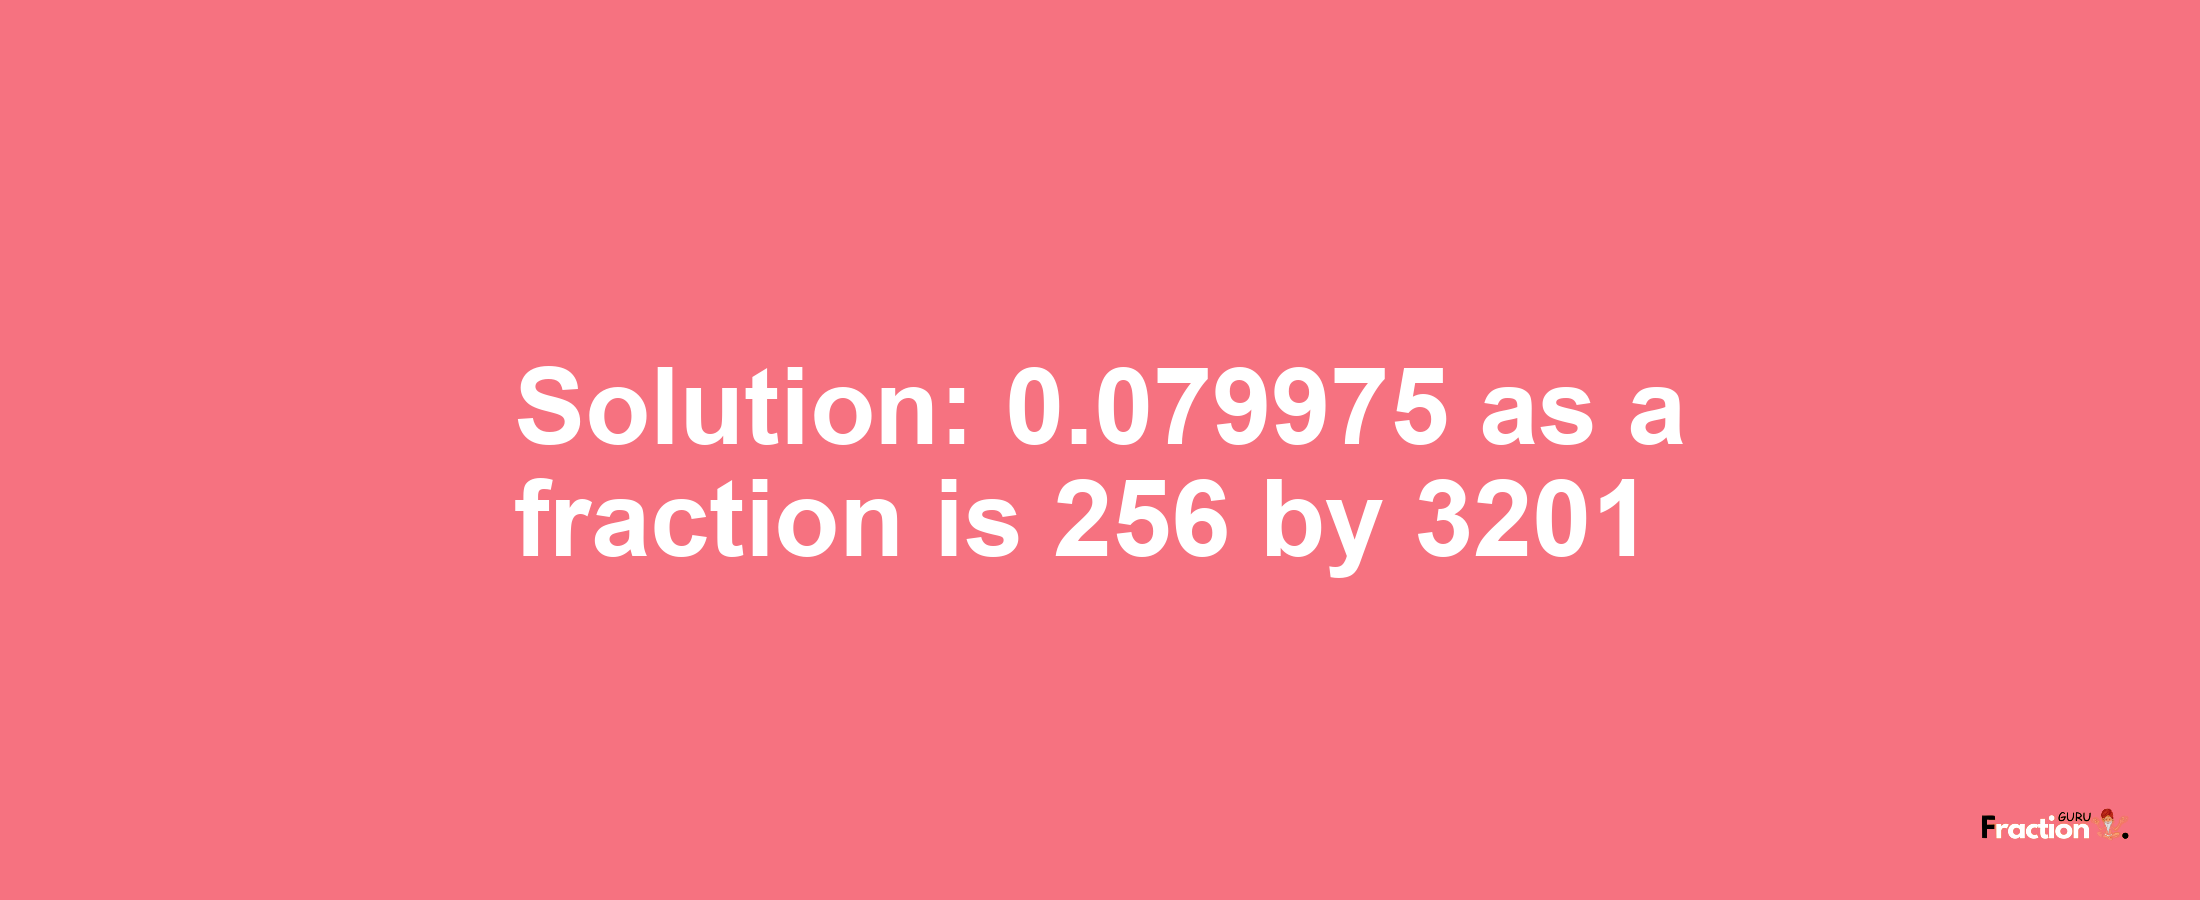 Solution:0.079975 as a fraction is 256/3201